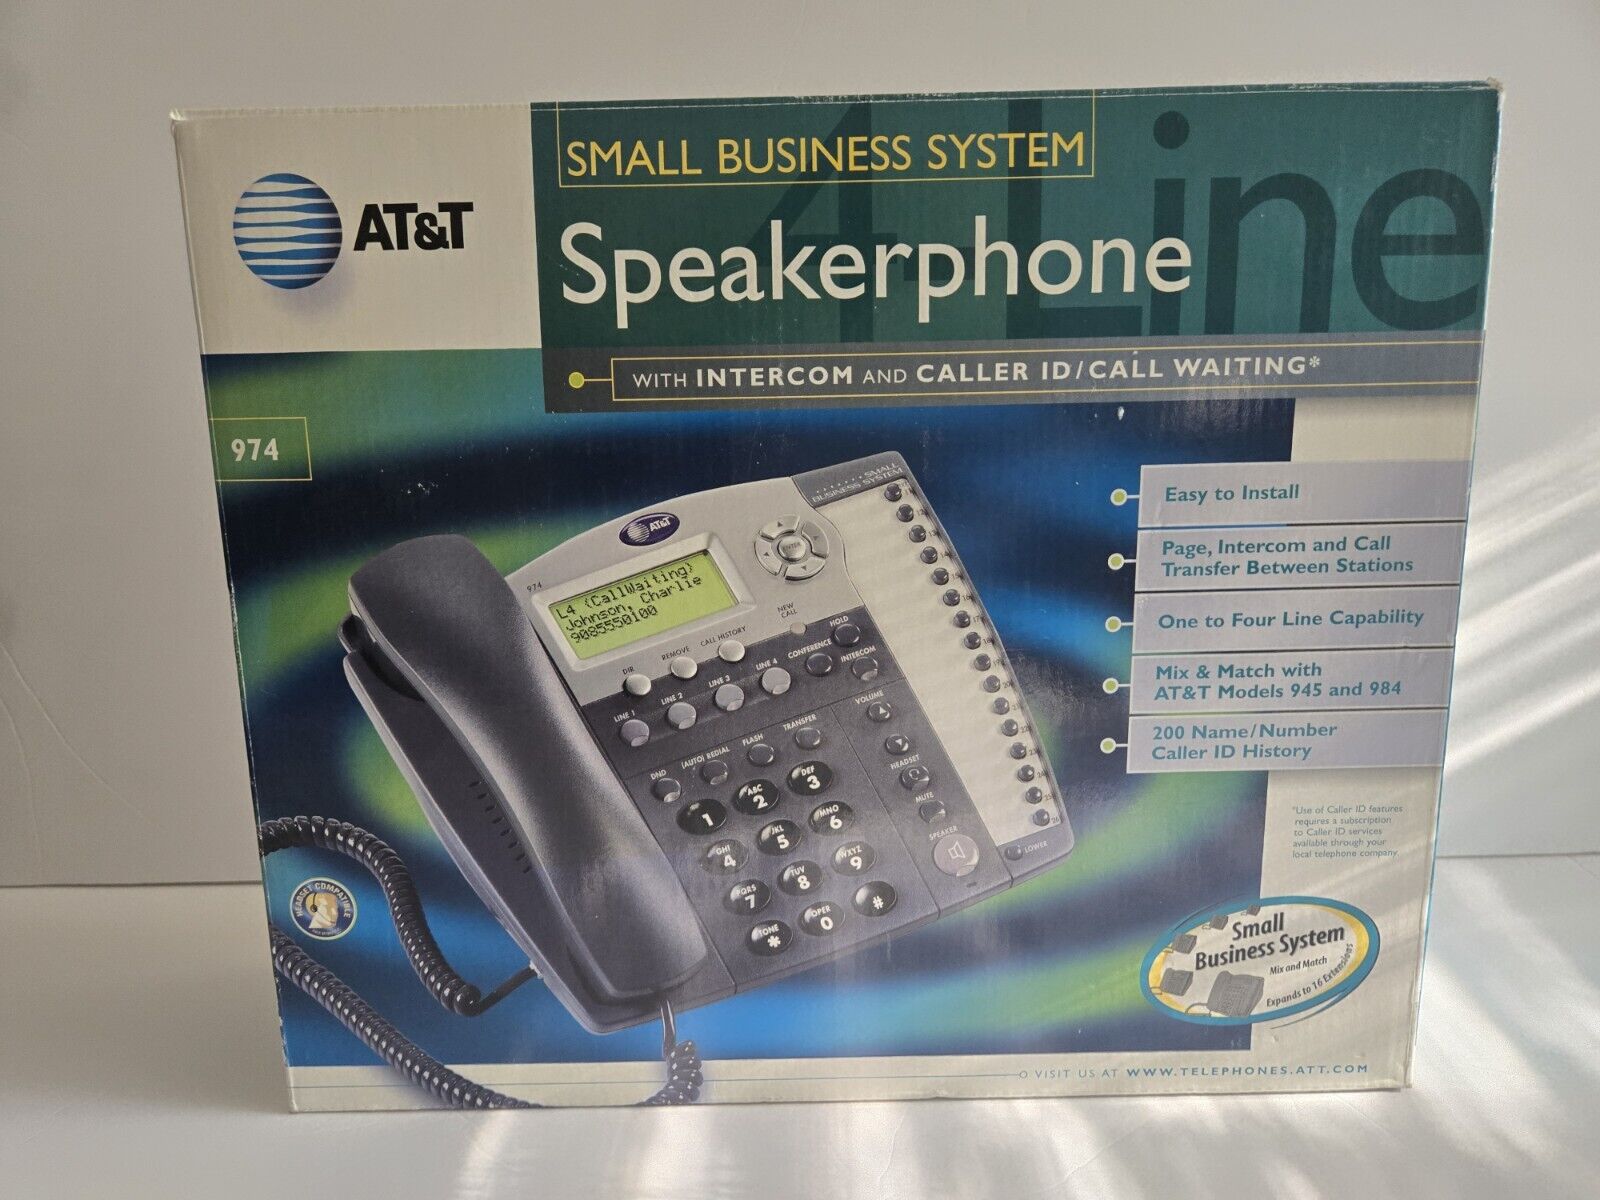 Business phone -AT&T 974 Small Business 4 Line System Speakerphone with Intercom